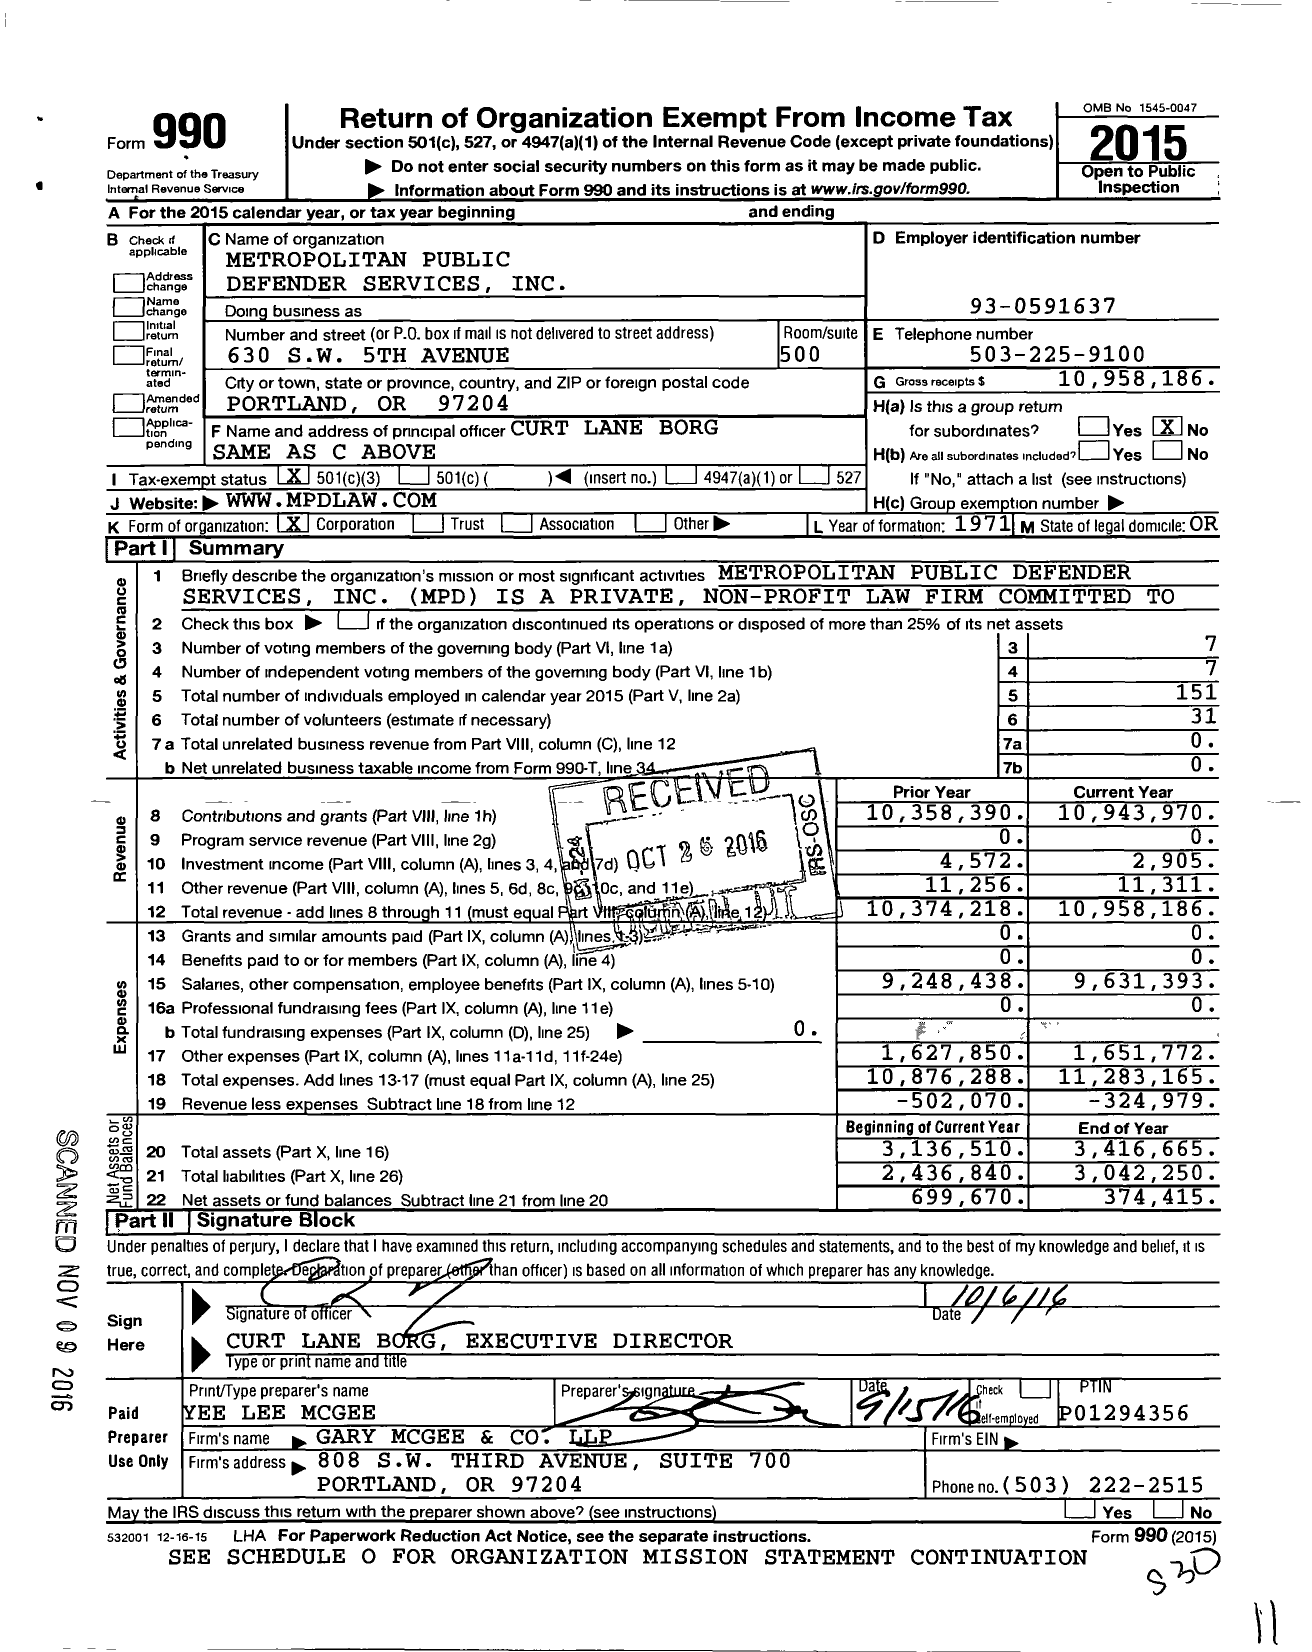 Image of first page of 2015 Form 990 for Metropolitan Public Defender Services